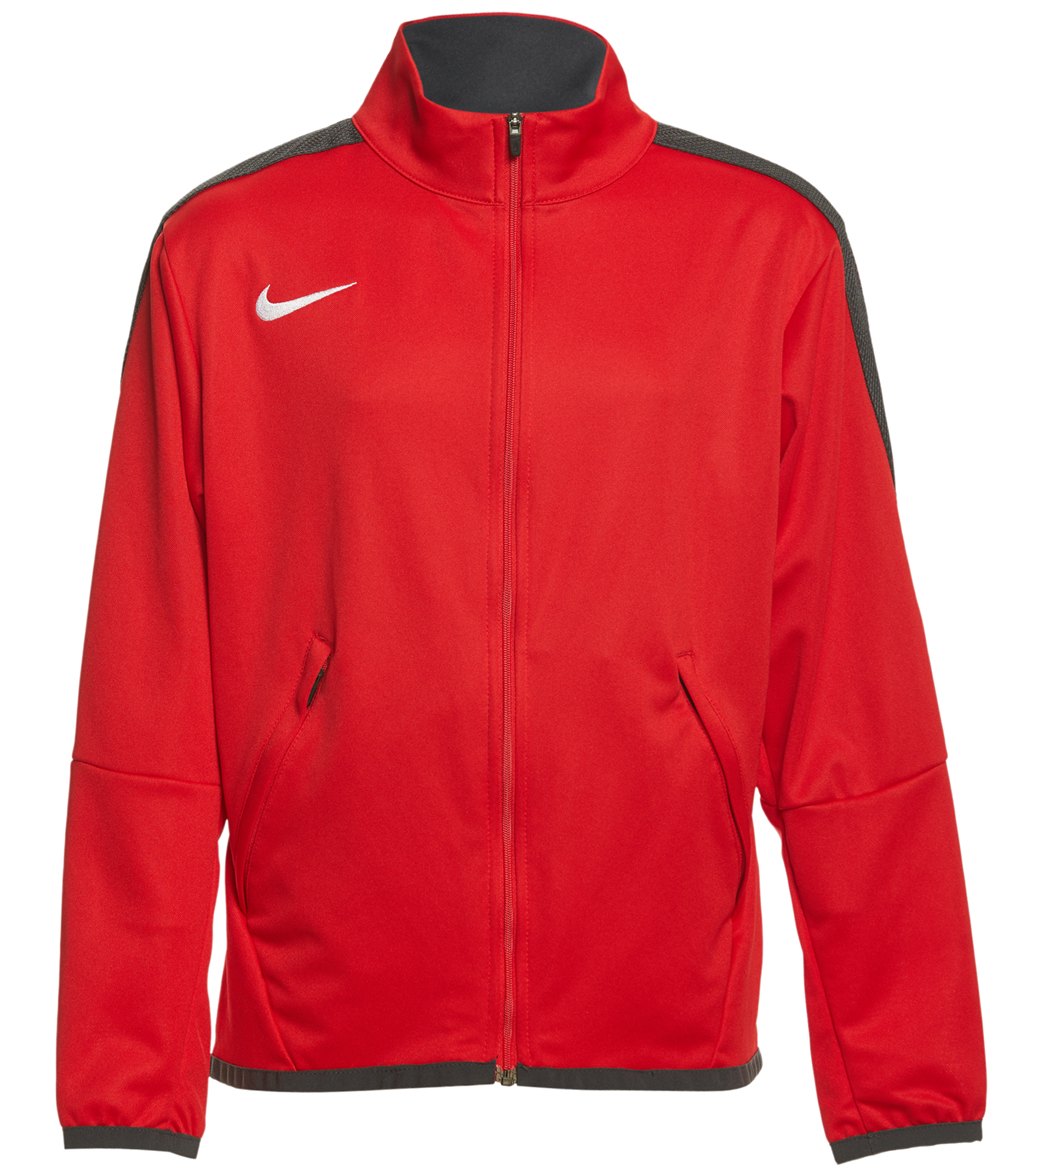 Nike Youth Women's Training Jacket - Scarlet Small Size Small Polyester - Swimoutlet.com